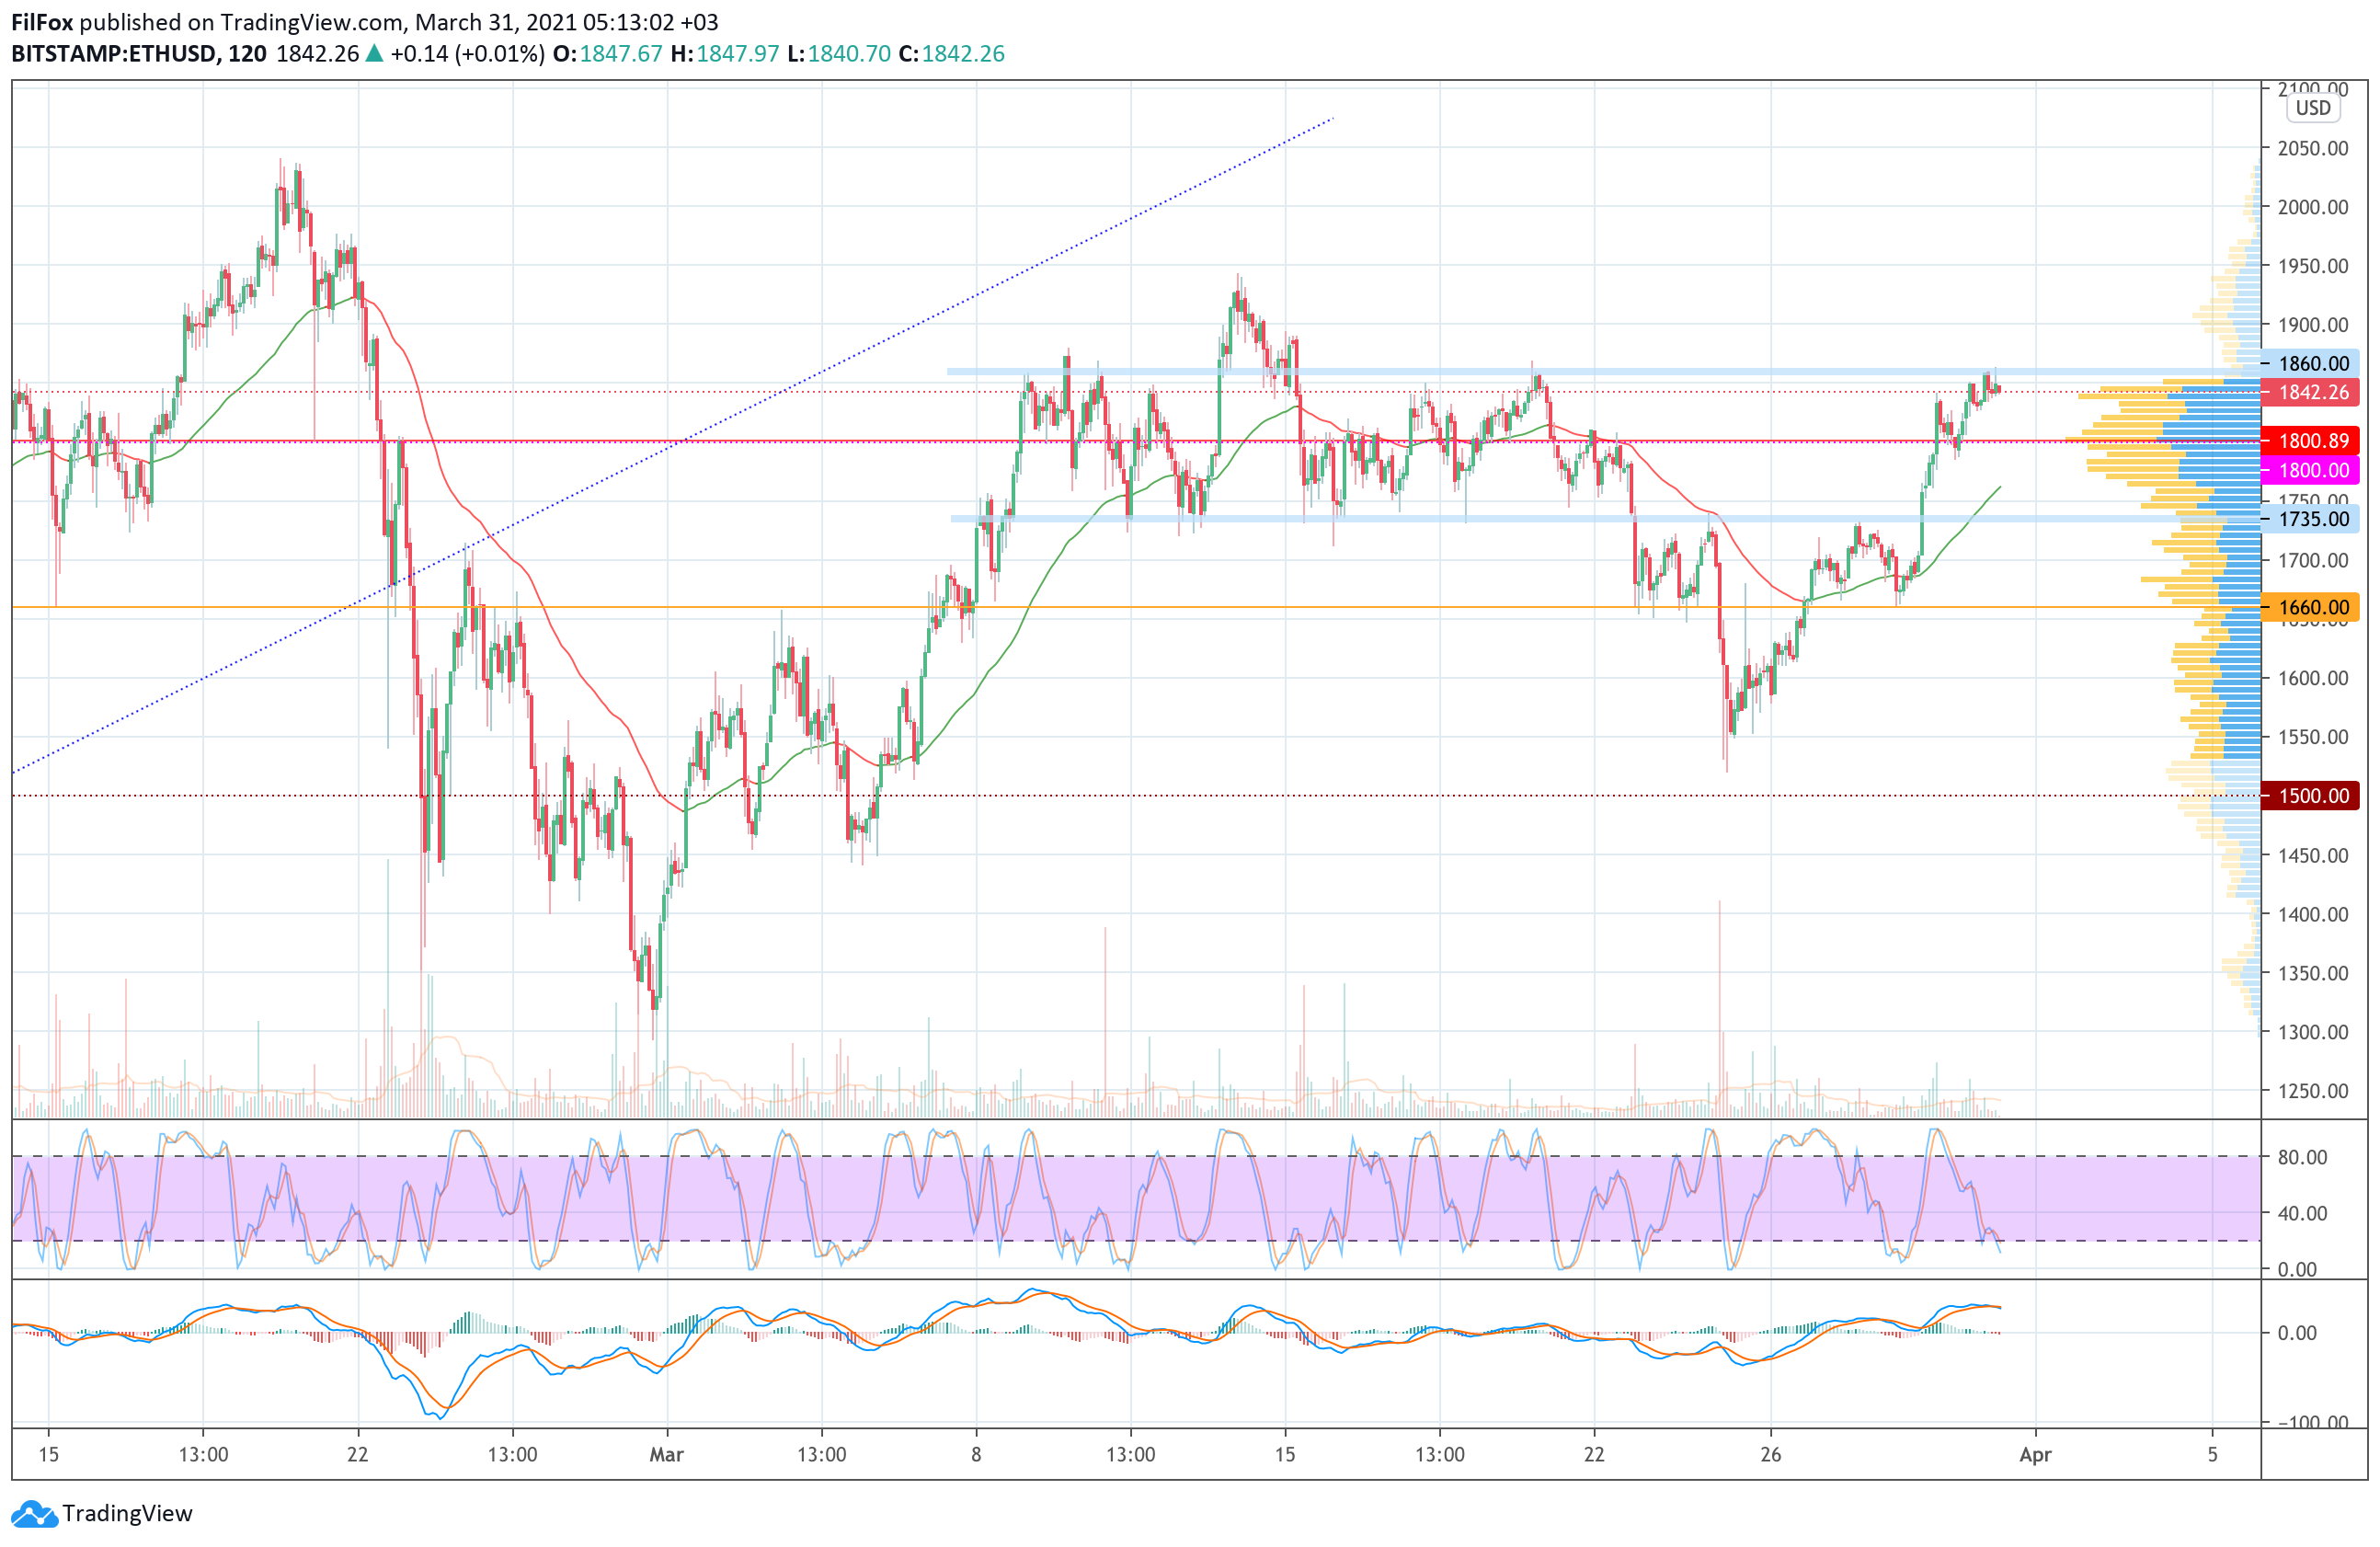 Analysis of the prices of Bitcoin, Ethereum, XRP for 03/31/2021